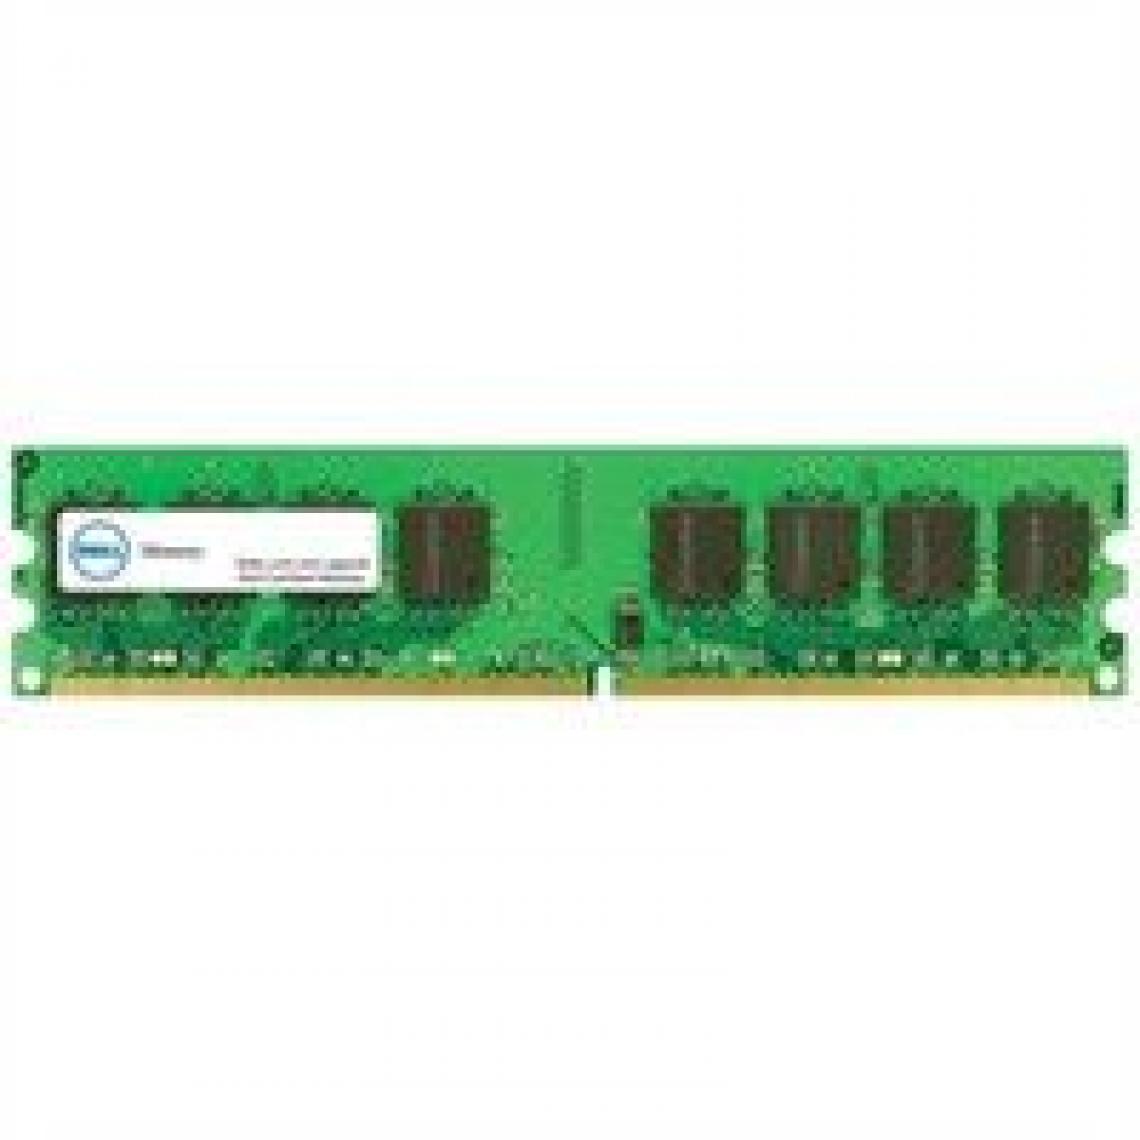 Inconnu - 8 GB Certified Replacement Memory Module for Select Systems-2RX8 SO-DIMM 2133MHz - RAM PC Fixe